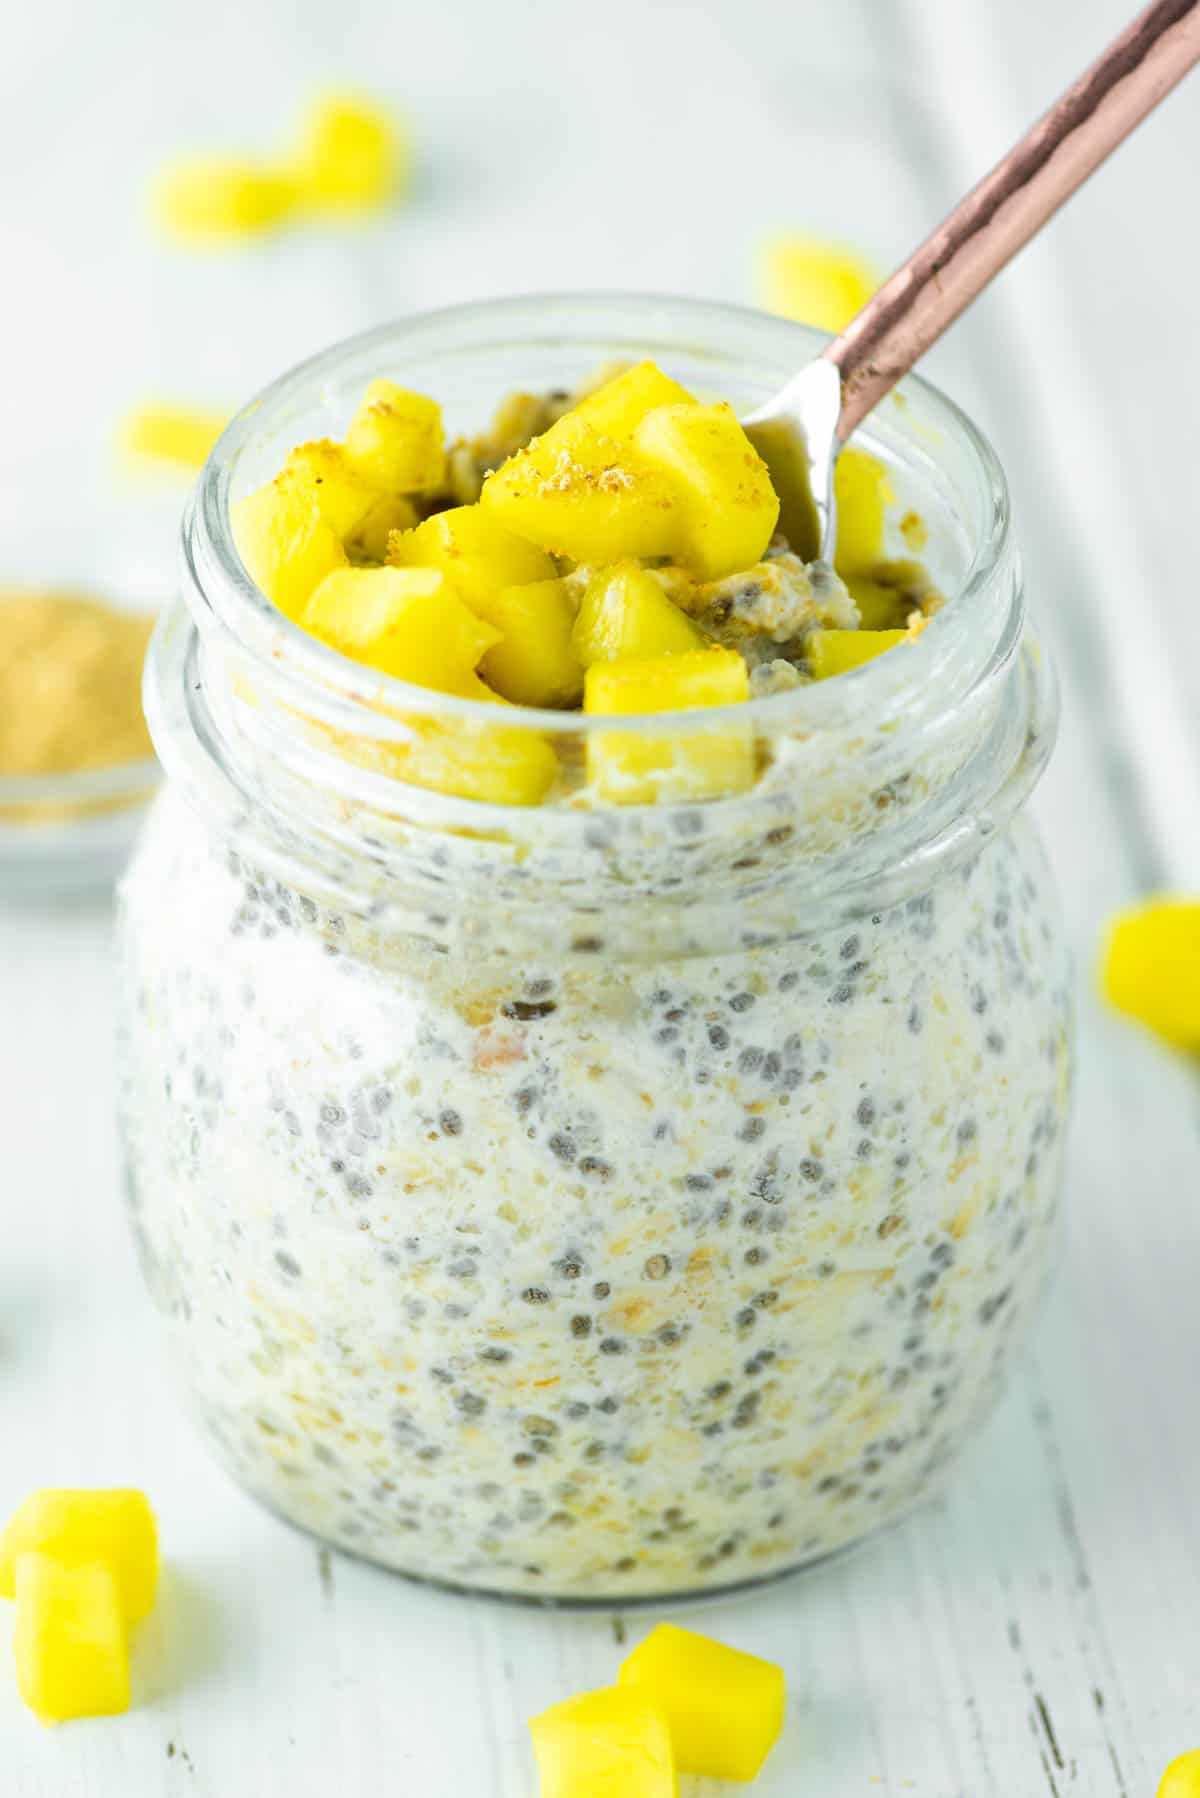 spoon dipped in glass jar of mango overnight oats